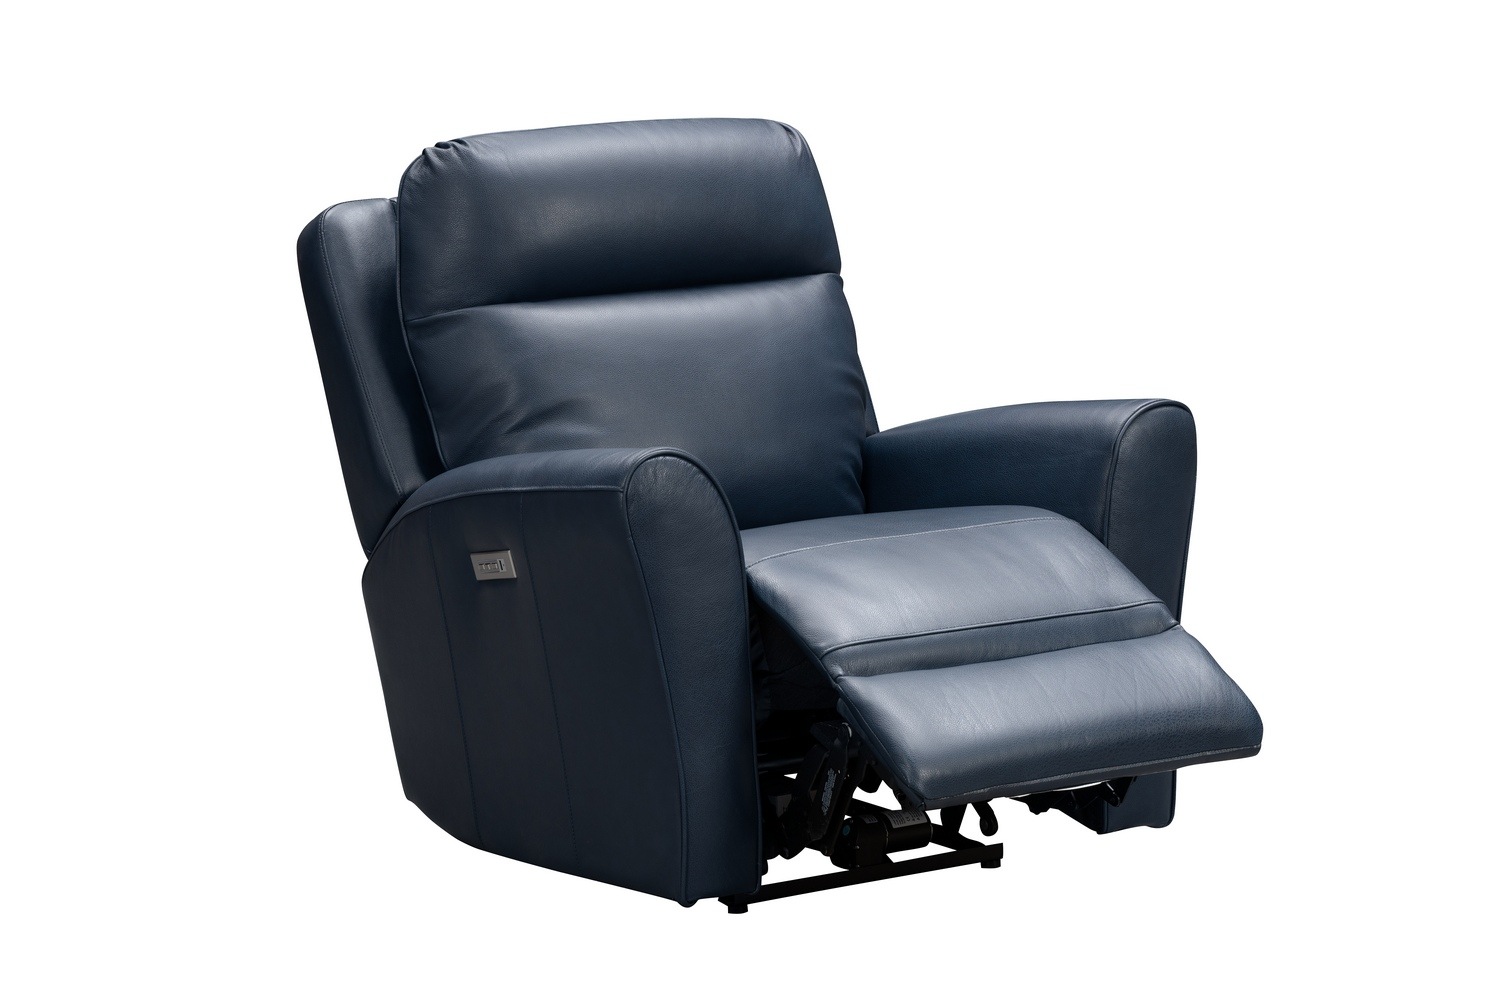 Barcalounger Kelsey Big and Tall Power Recliner Chair with Power Head Rest and Lumbar - Marco Navy Blue/Leather Match